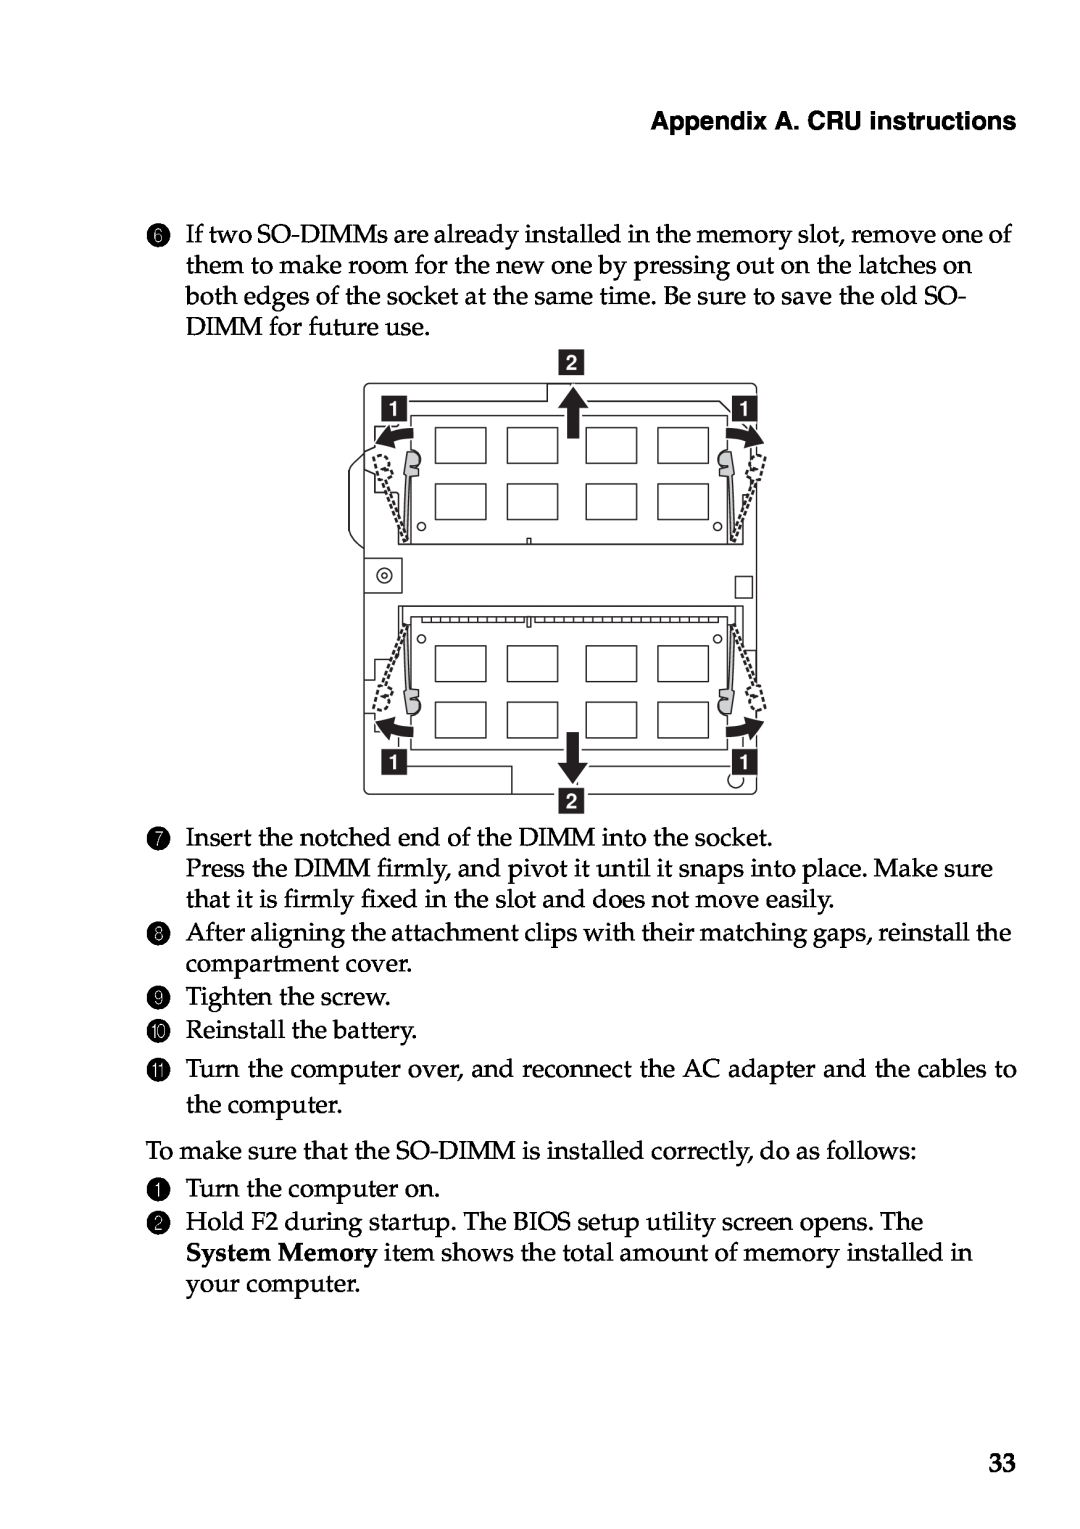 Lenovo V360 manual Appendix A. CRU instructions, b aa aa b, Insert the notched end of the DIMM into the socket 